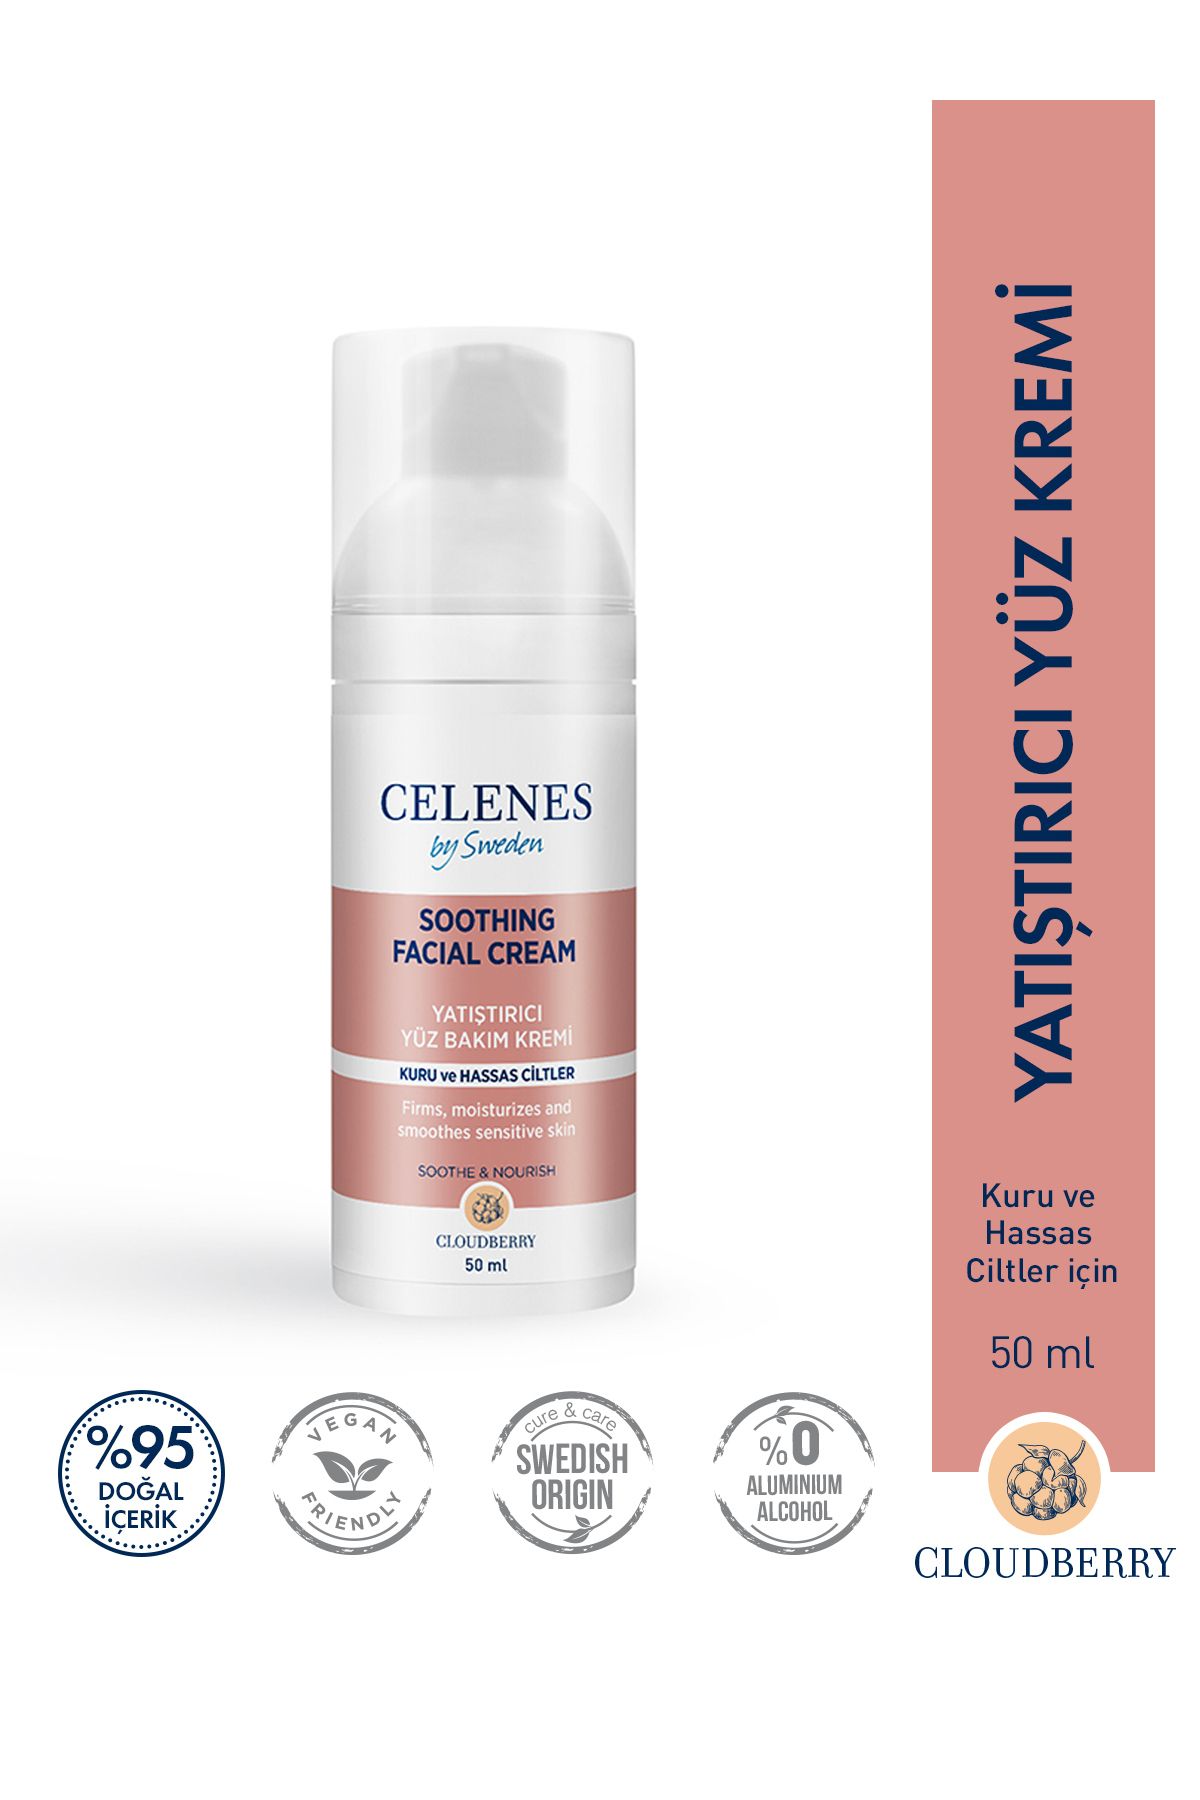 Celenes by Sweden CLOUDBERRY SOOTHİNG FACE CREAM 50ML DRY/SENSİTİVE